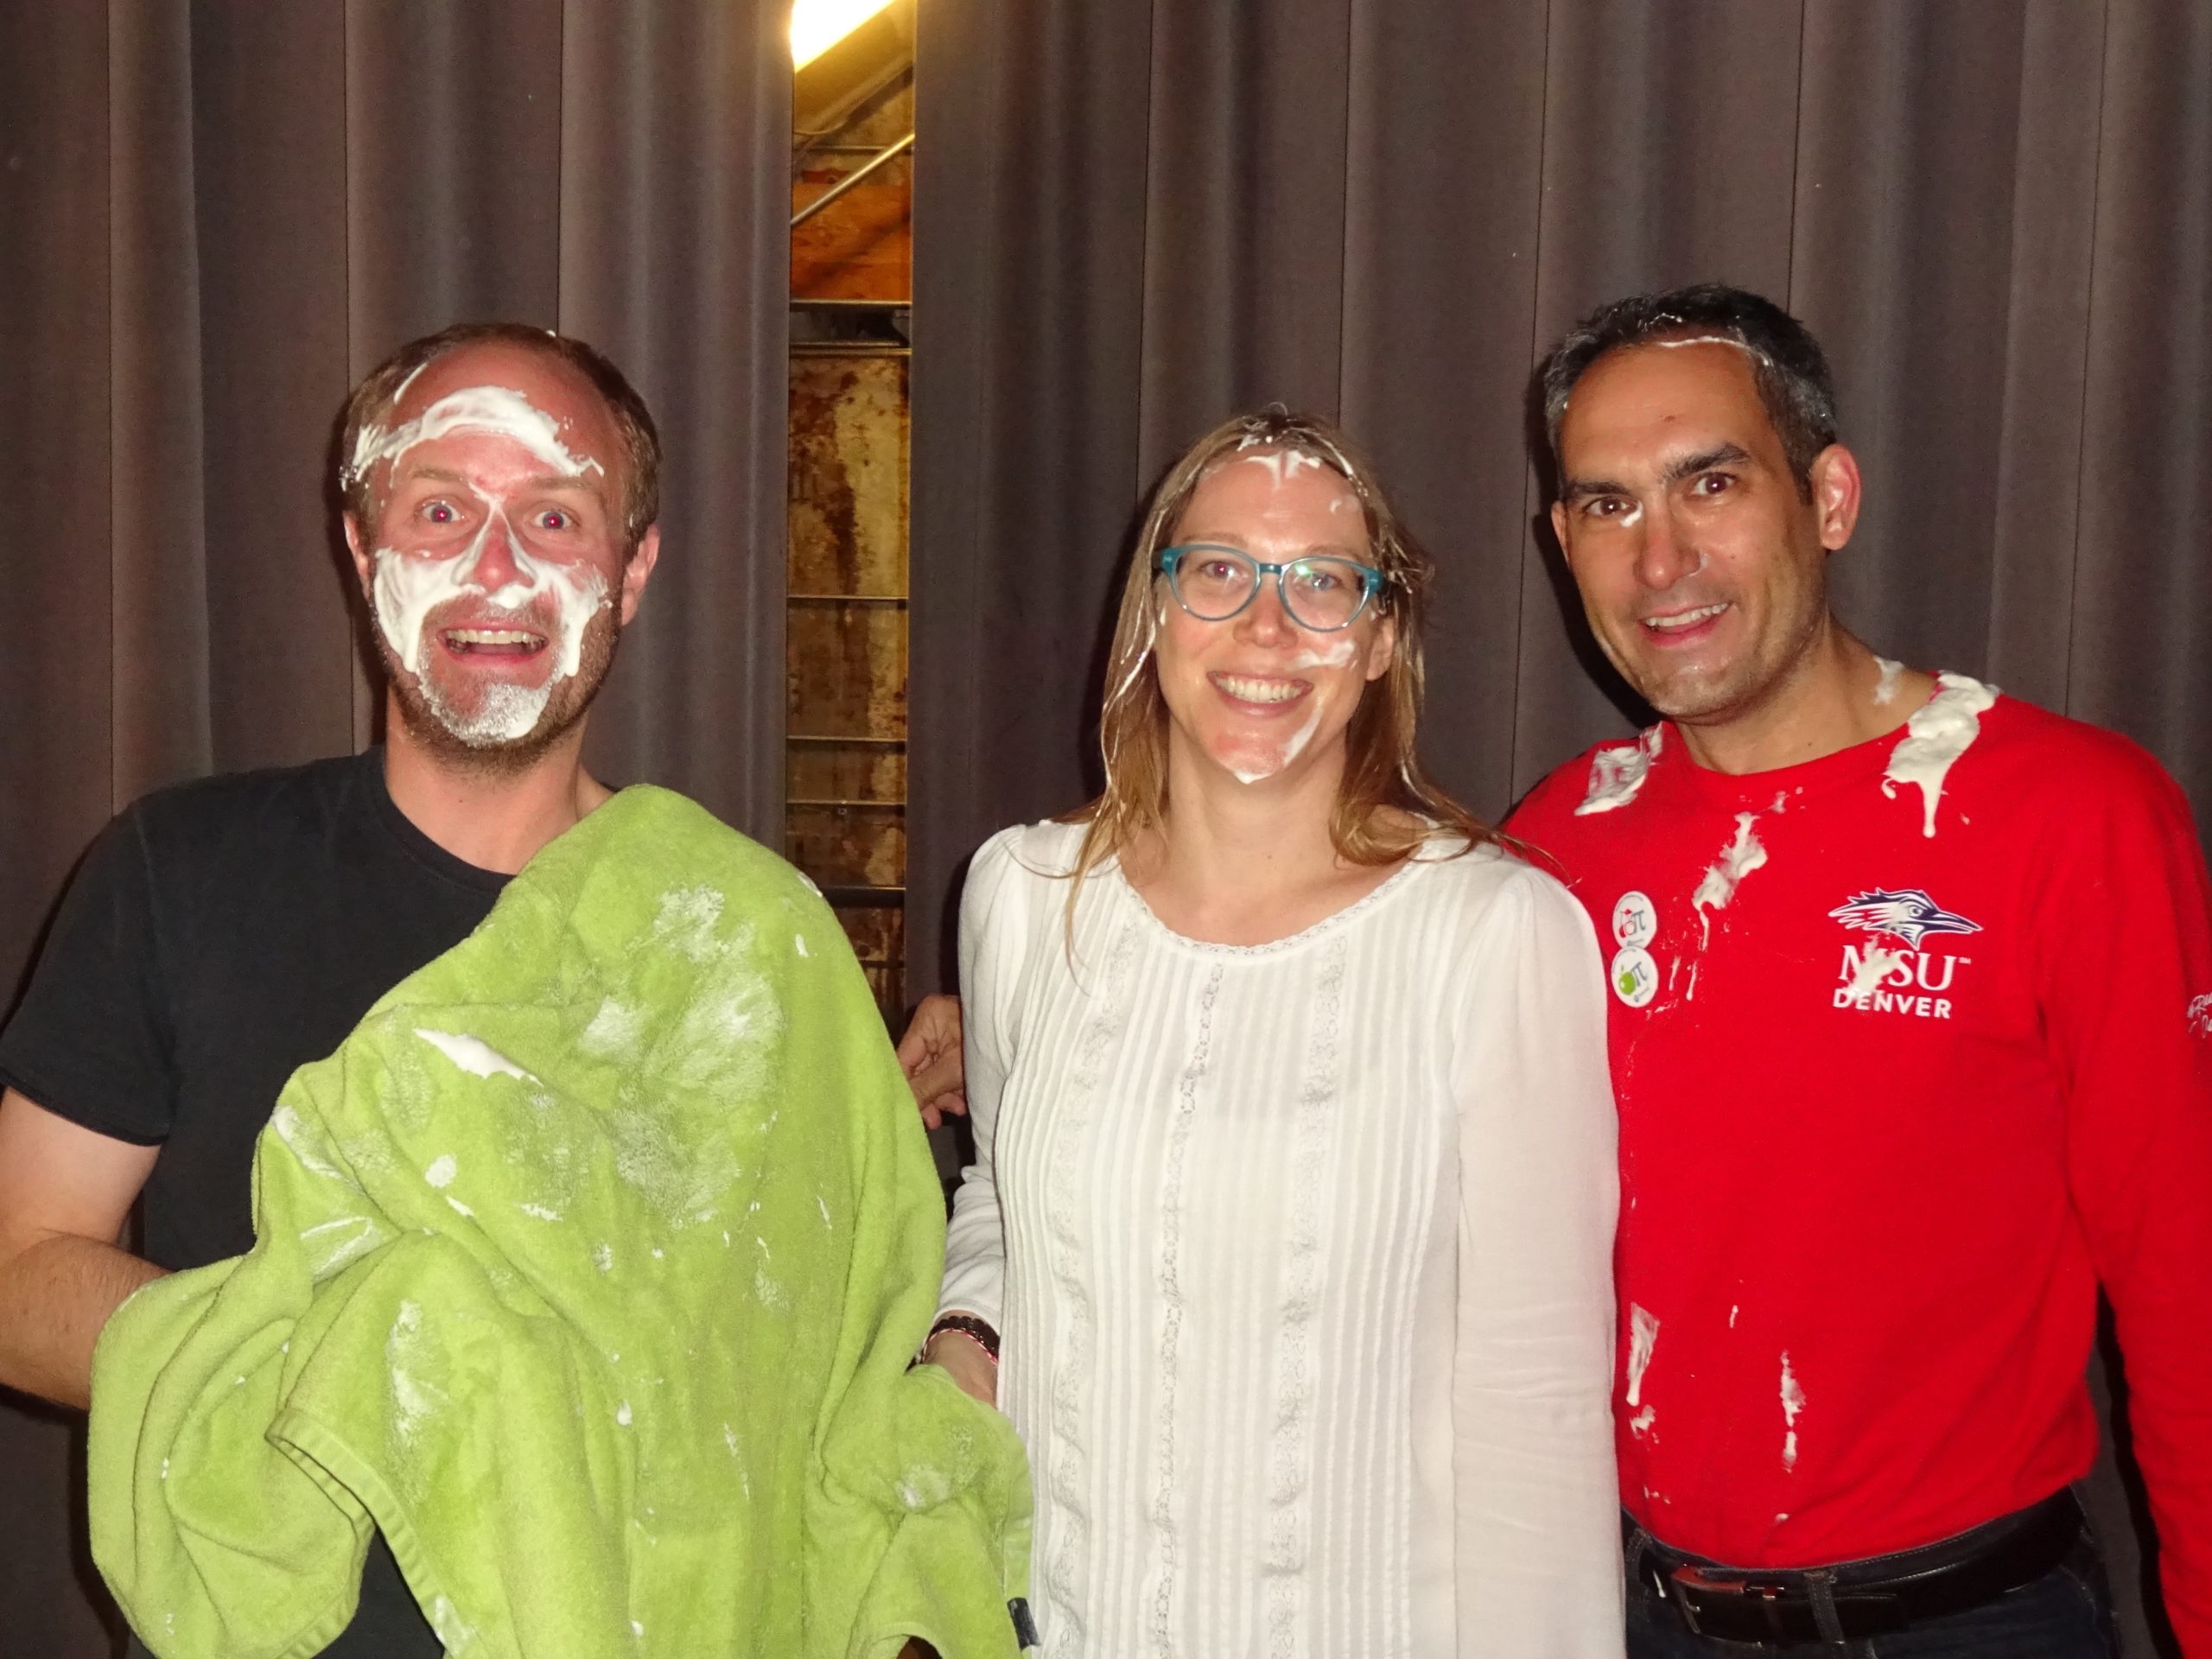 Teachers posing with whipped cream on their faces after being smushed with pies during 